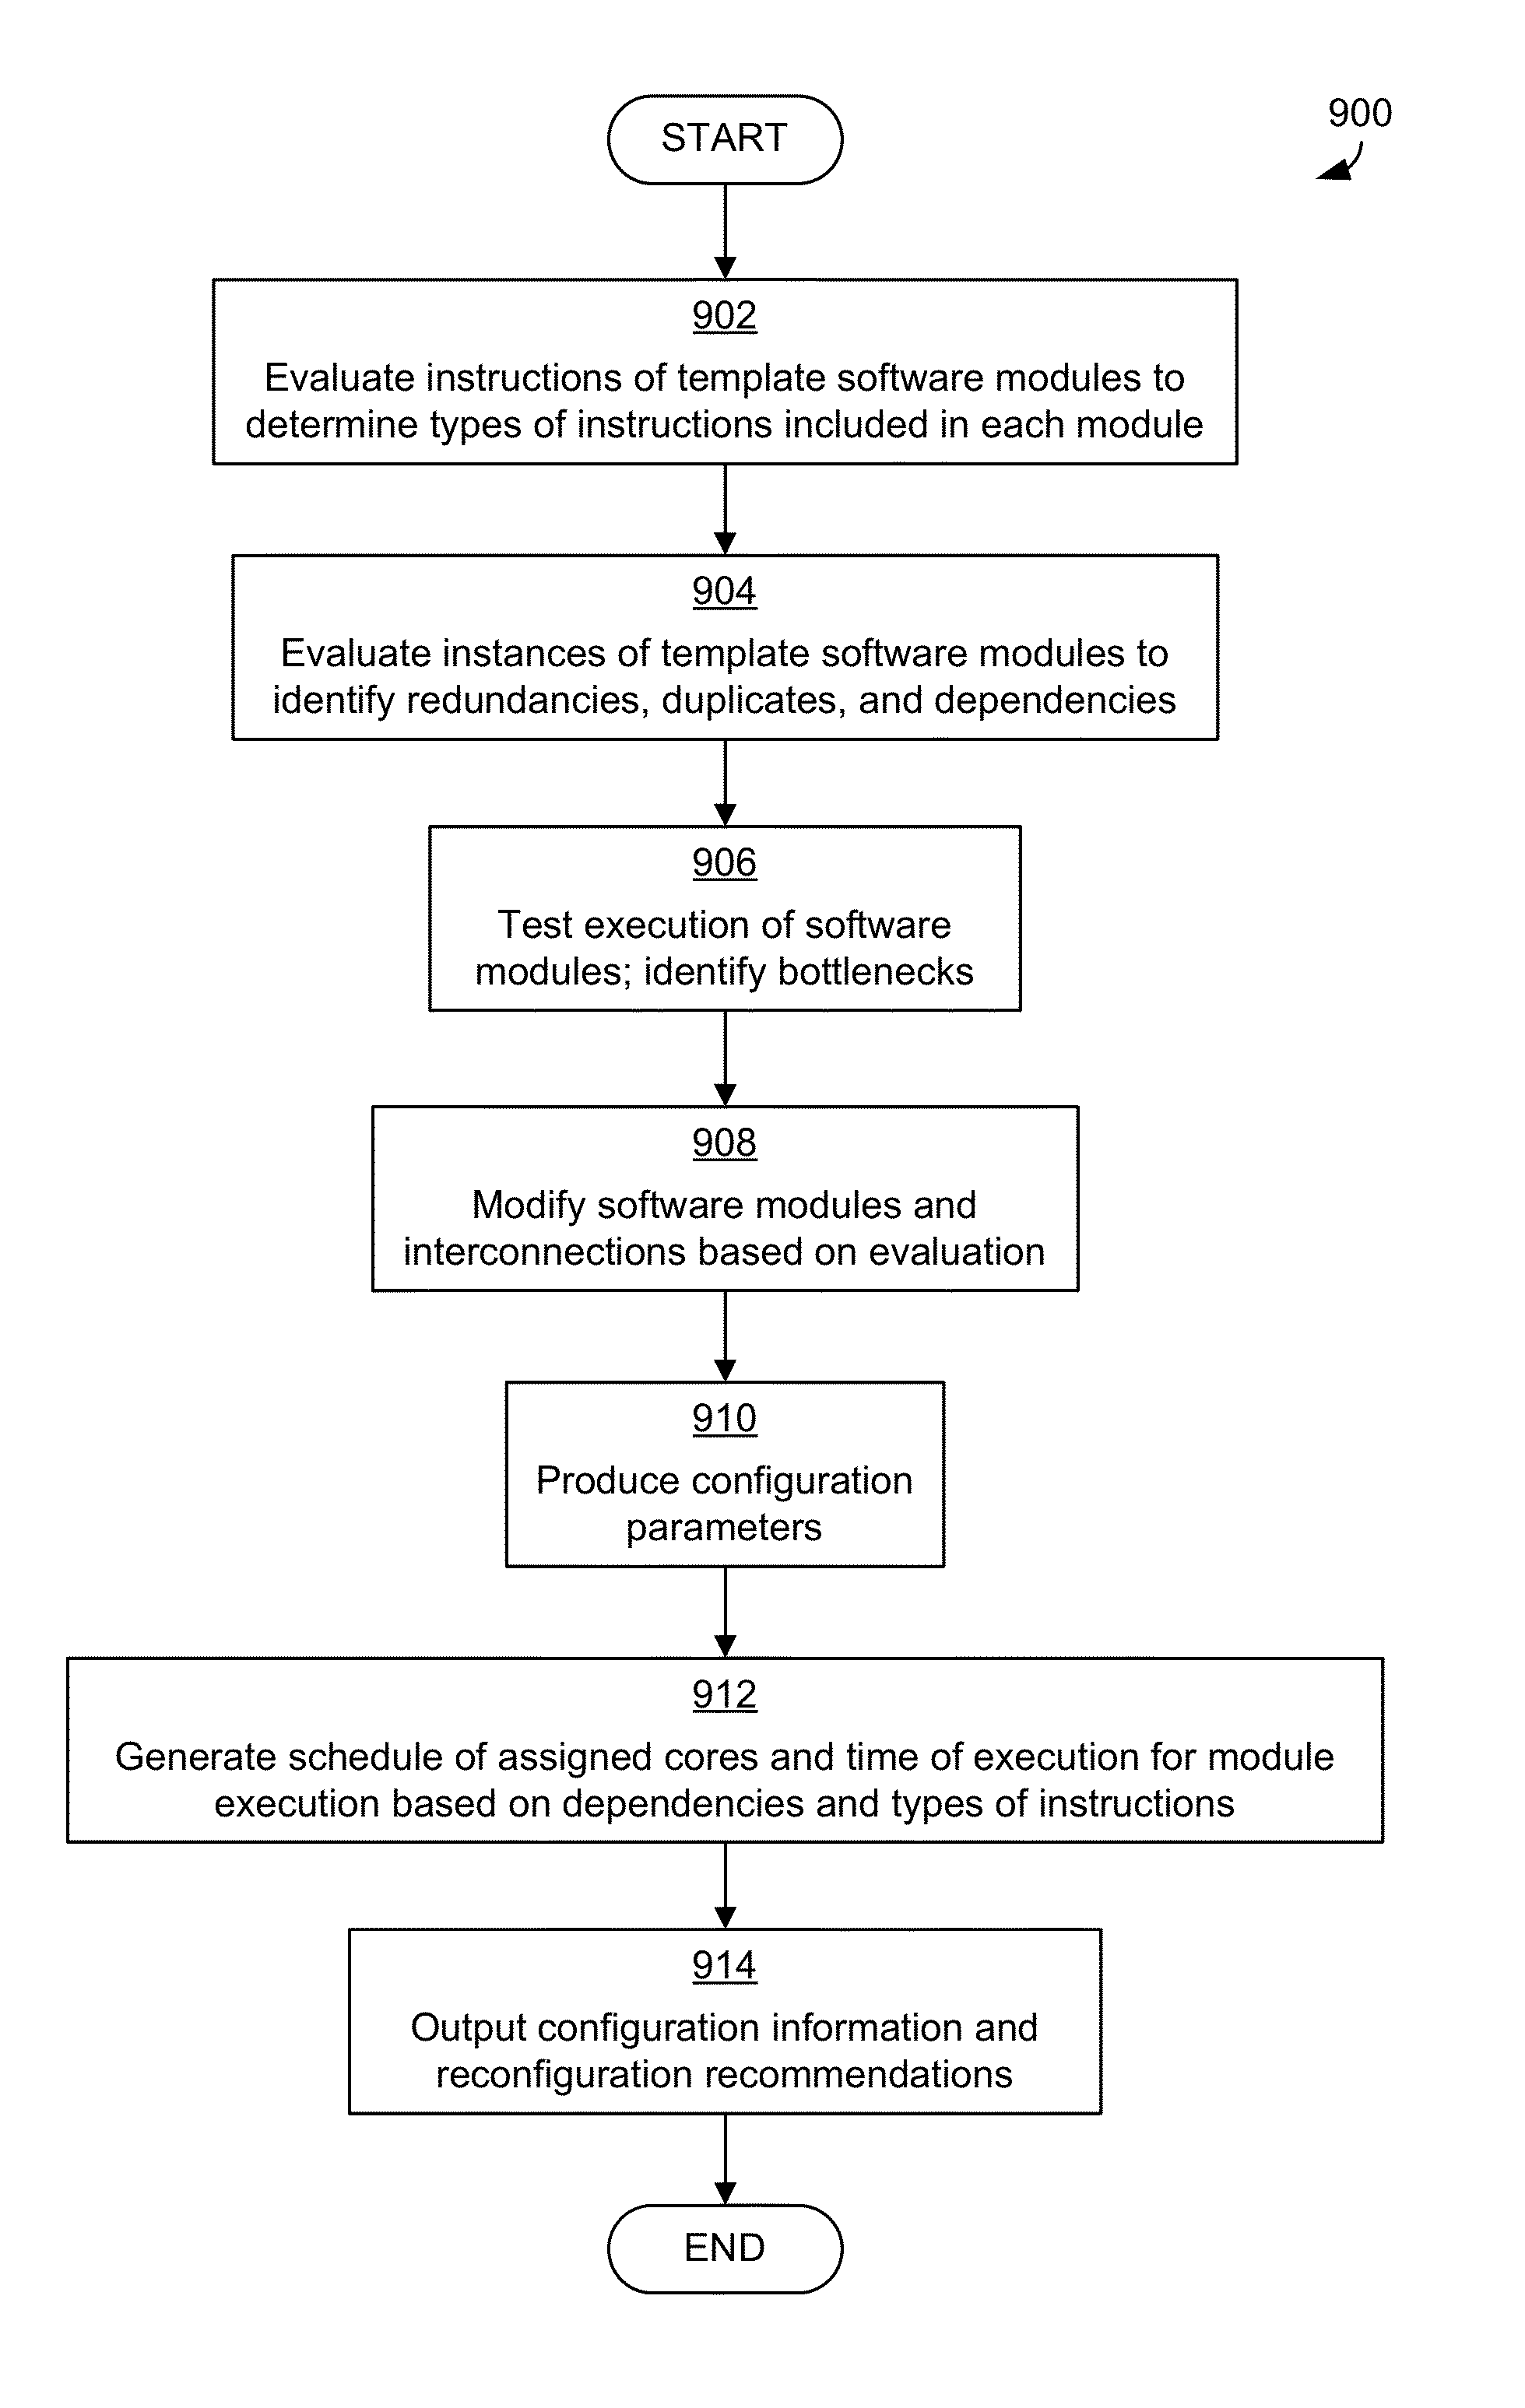 Parallel processing system